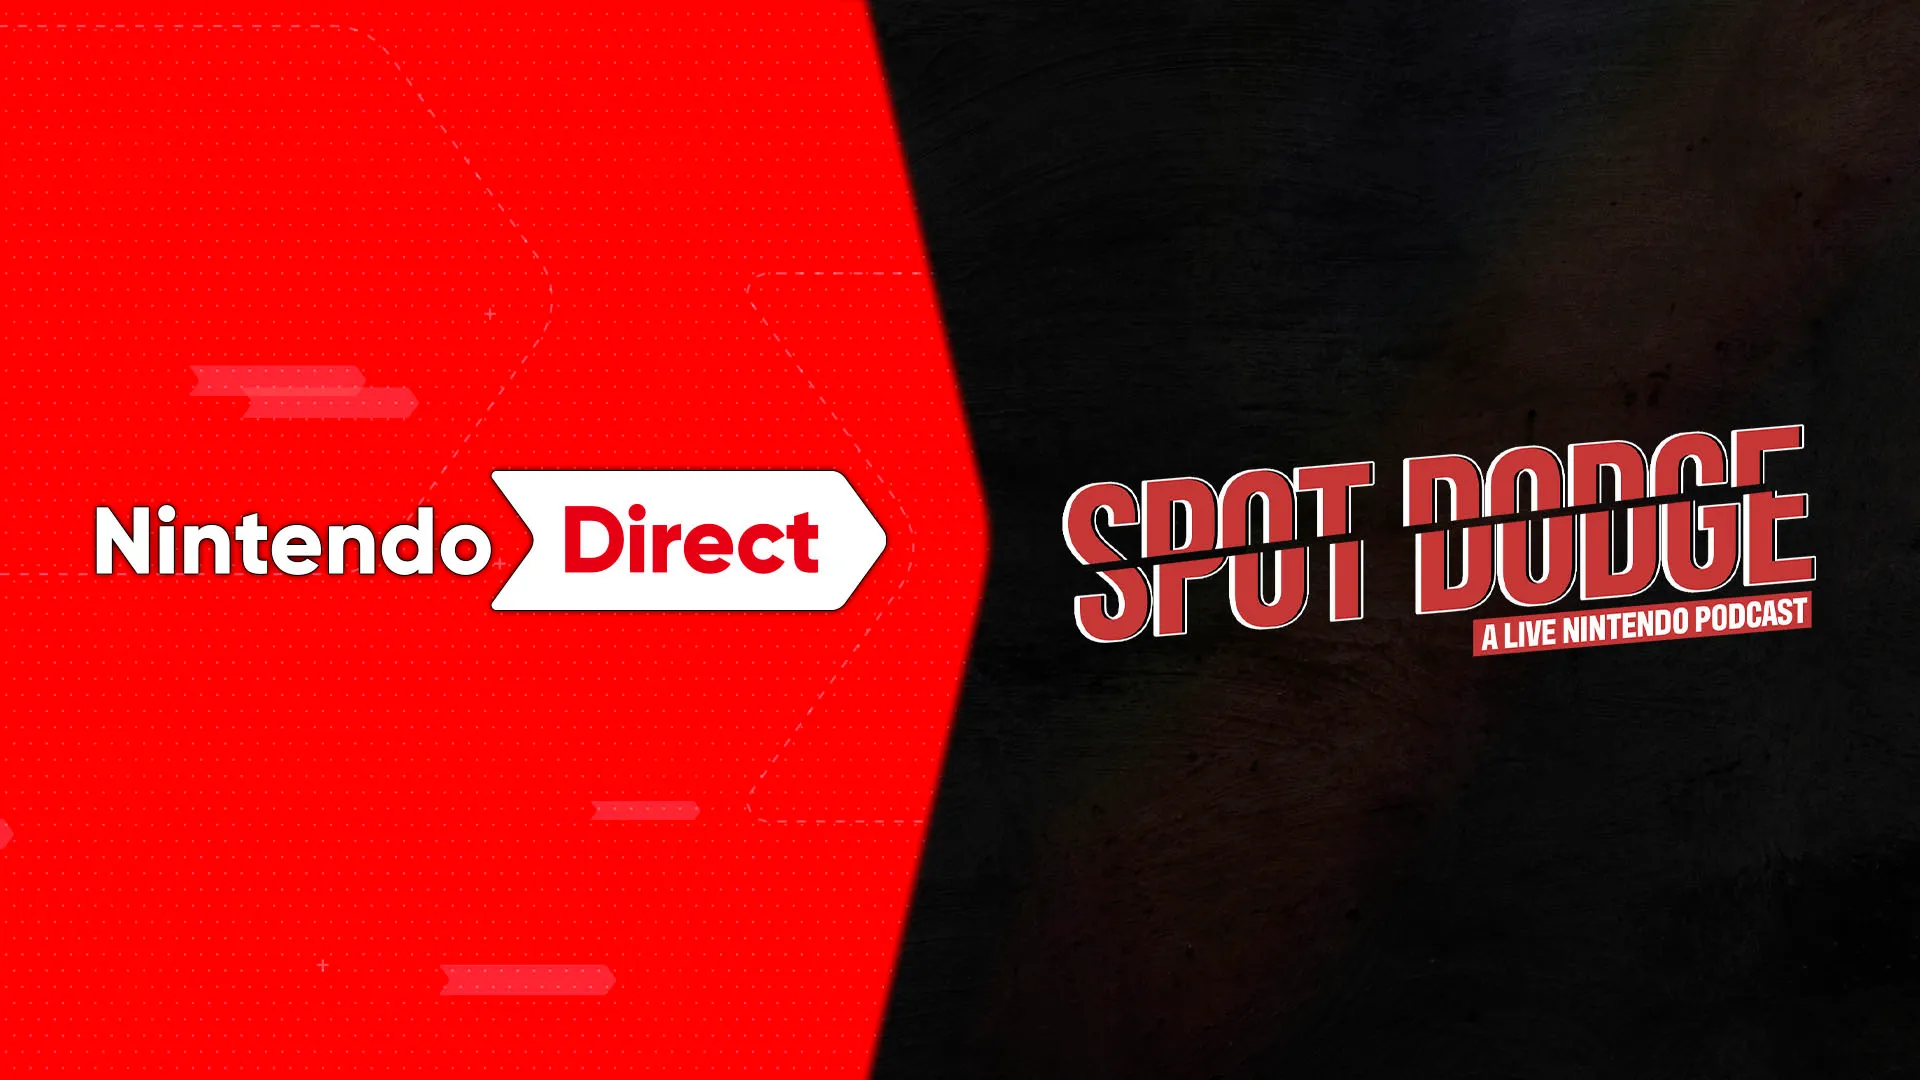 The next Nintendo Direct will take place on February 8th